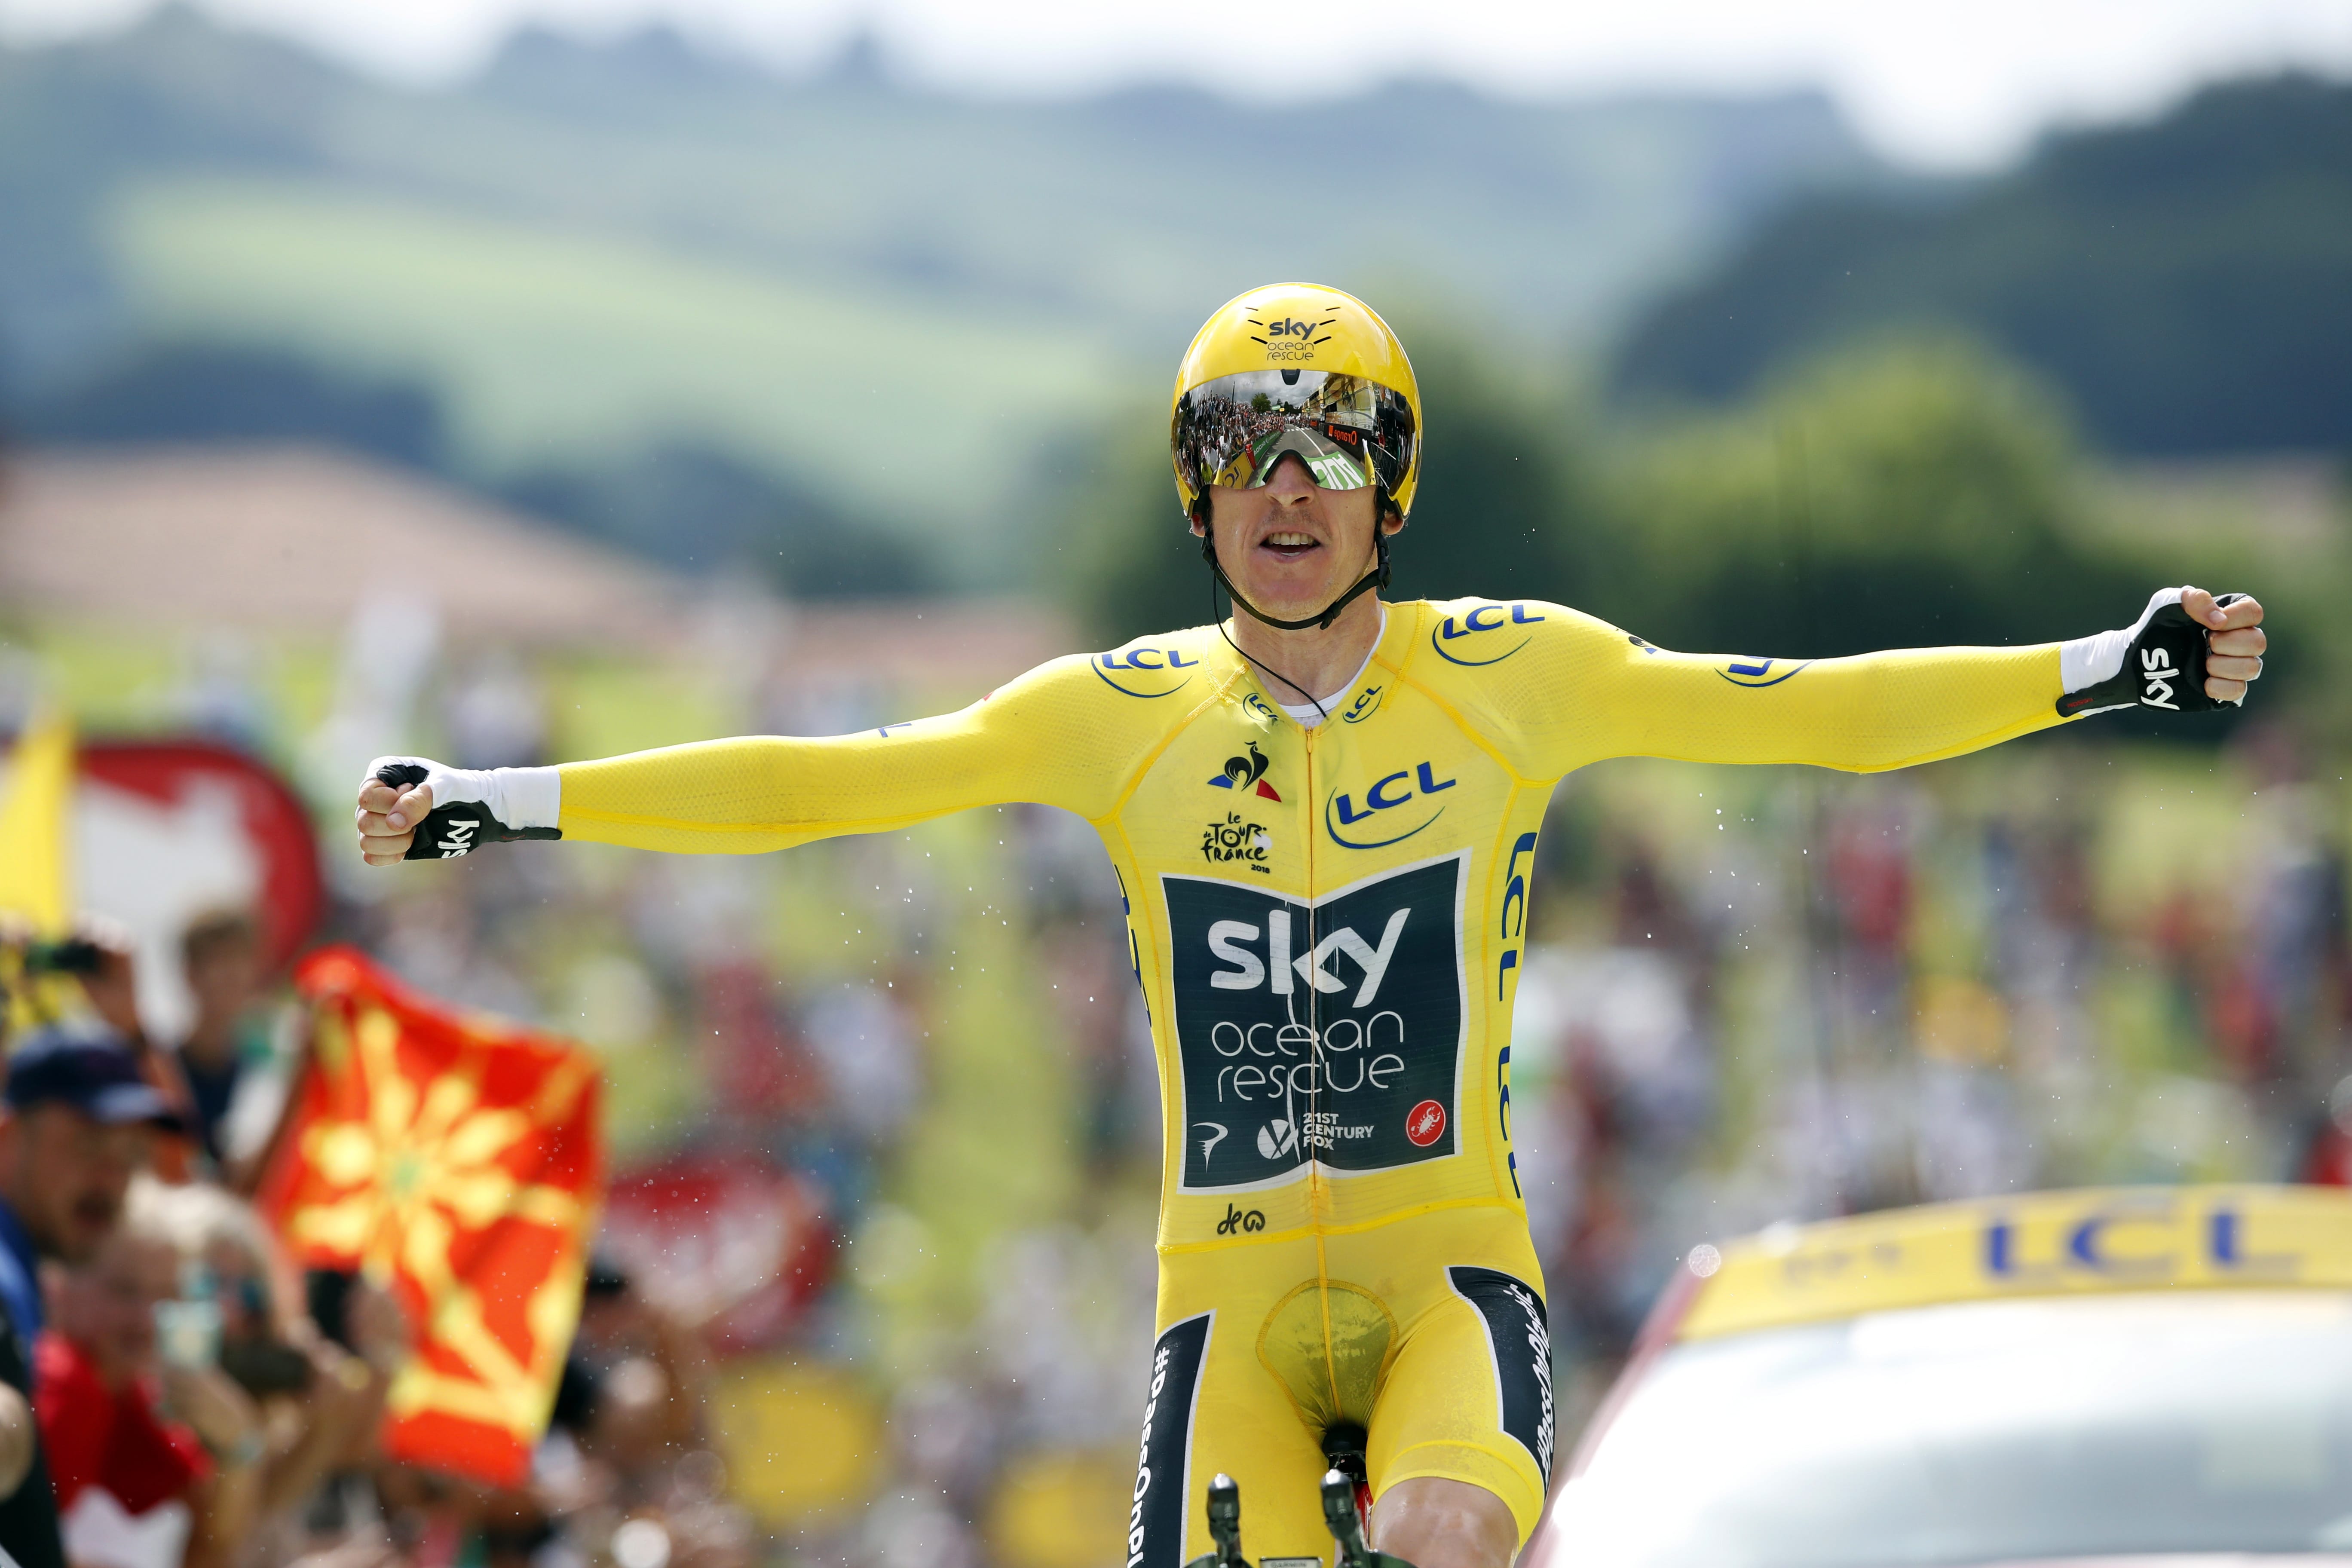 Britain's Geraint Thomas, wearing the overall leader's yellow jersey reacts as he crosses the finish line during the twentieth stage of the Tour de France cycling race, an individual time trial over 31 kilometers (19.3 miles) with start in Saint-Pee-sur-Nivelle and finish in Espelette, France, Saturday, July 28, 2018.